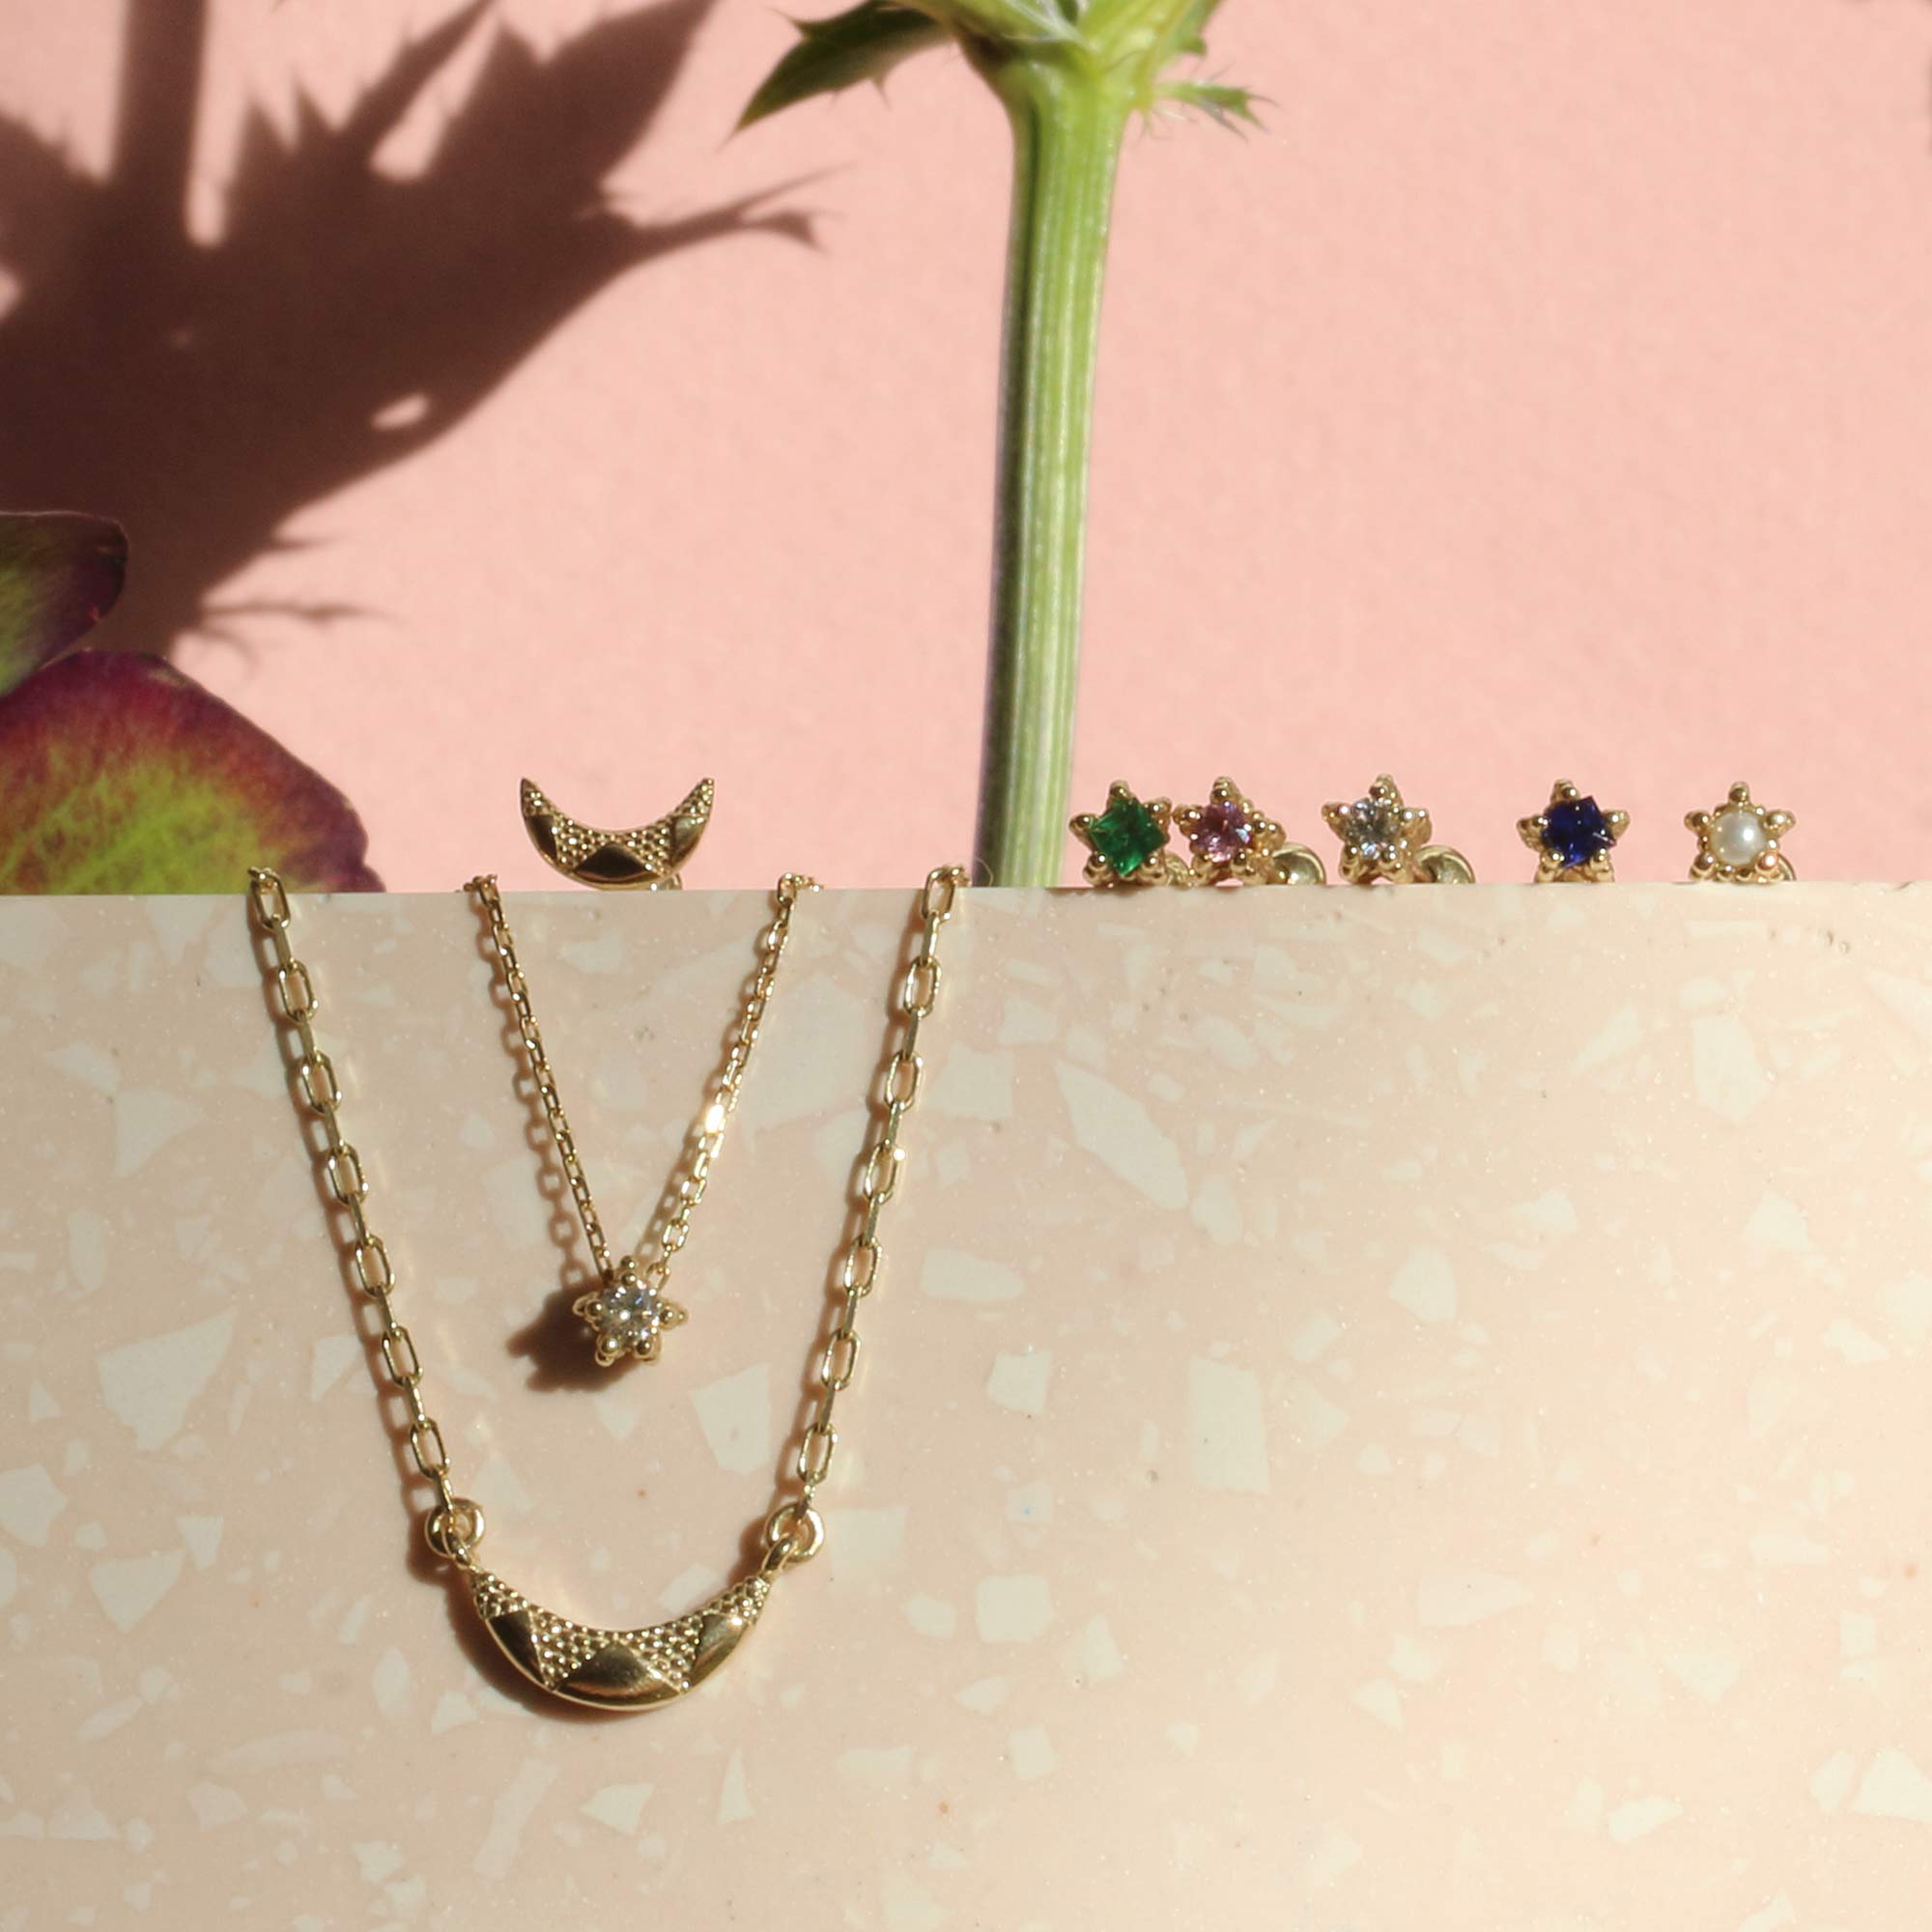 Line up of textured 9ct gold gemstone earrings and necklaces on pink backdrop